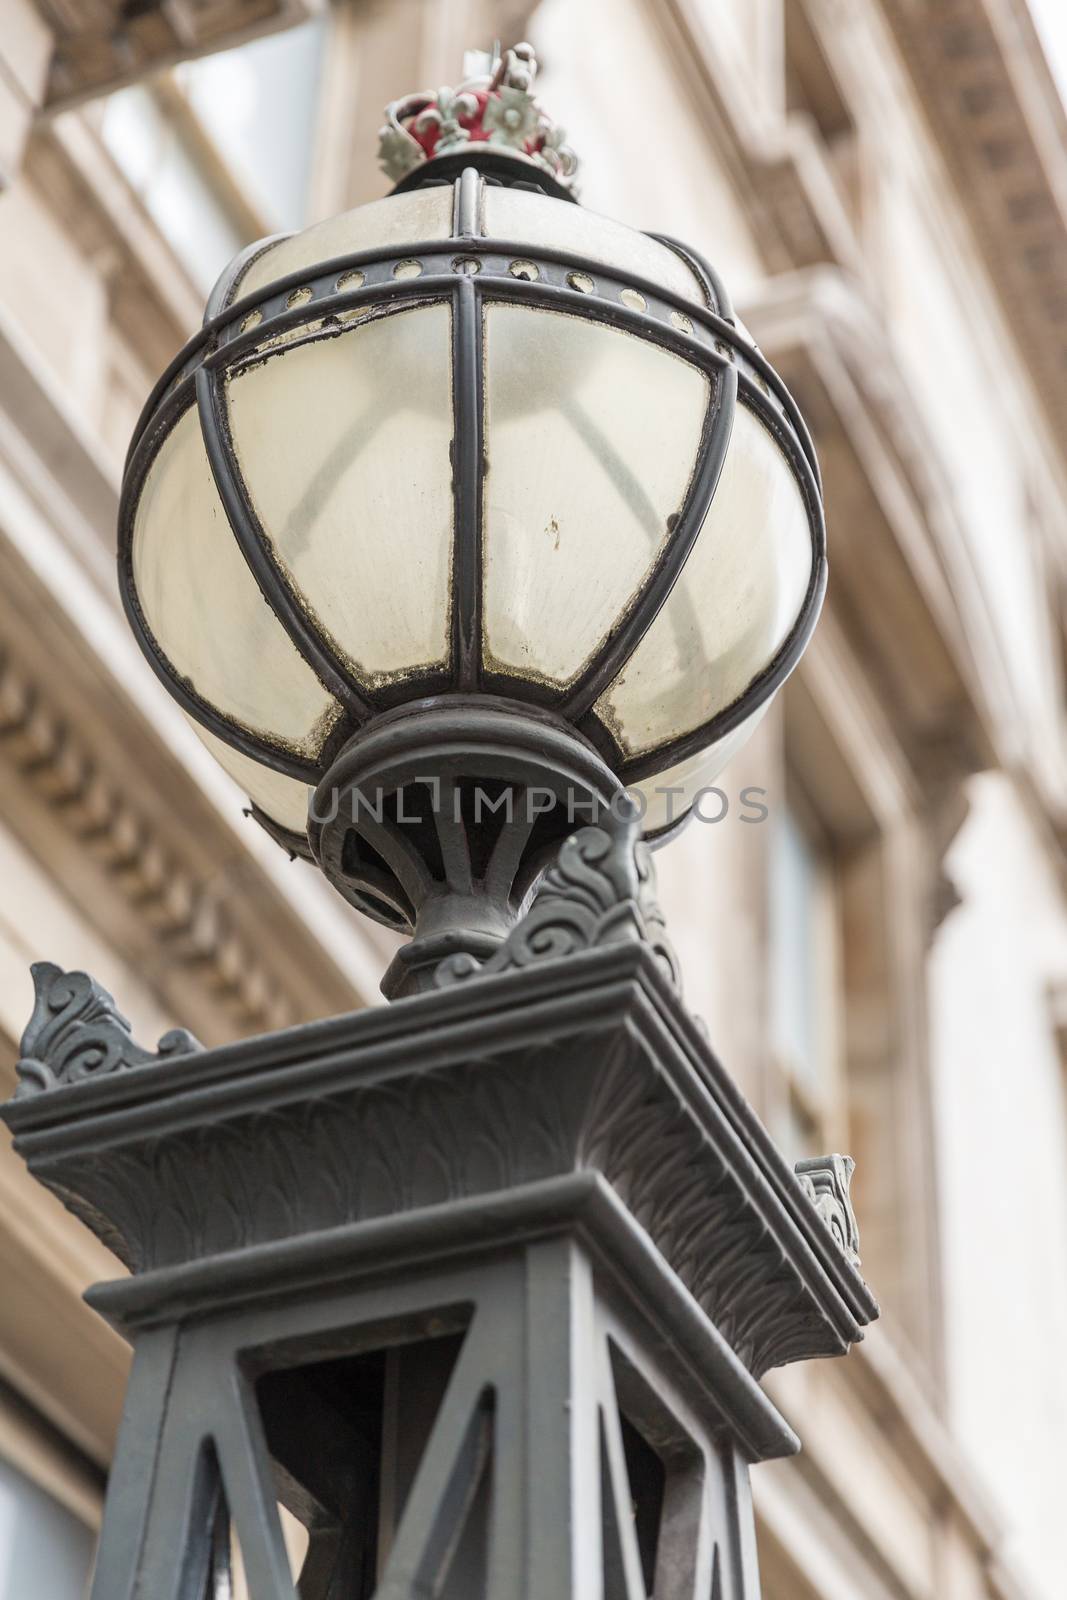 Original Gas Lamp in London by chrisukphoto